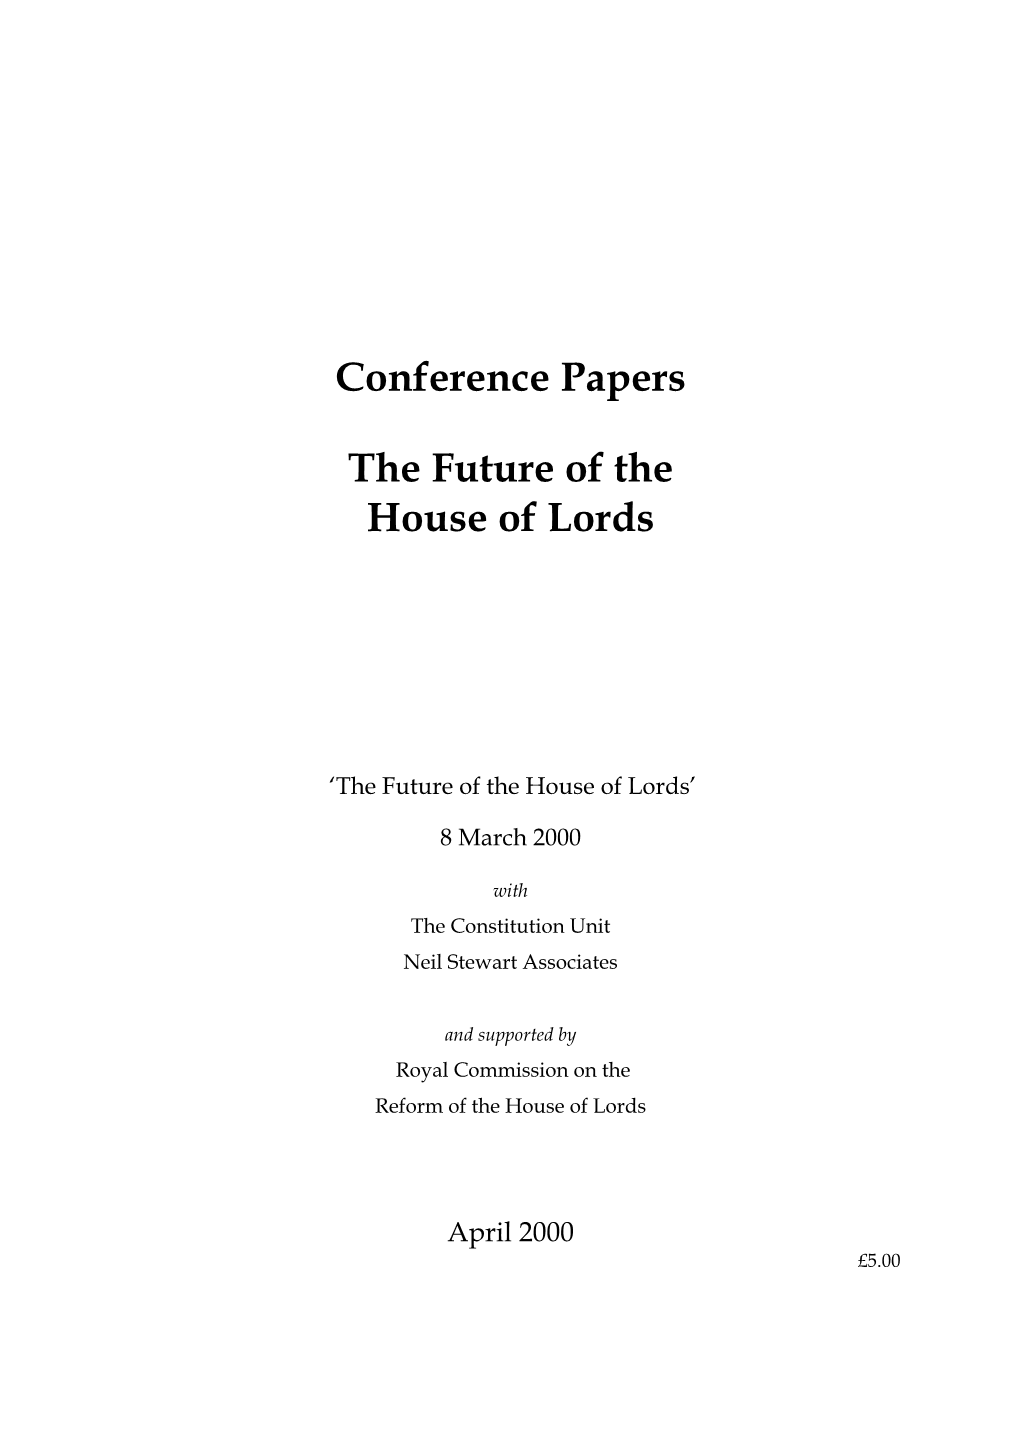 Conference Papers the Future of the House of Lords